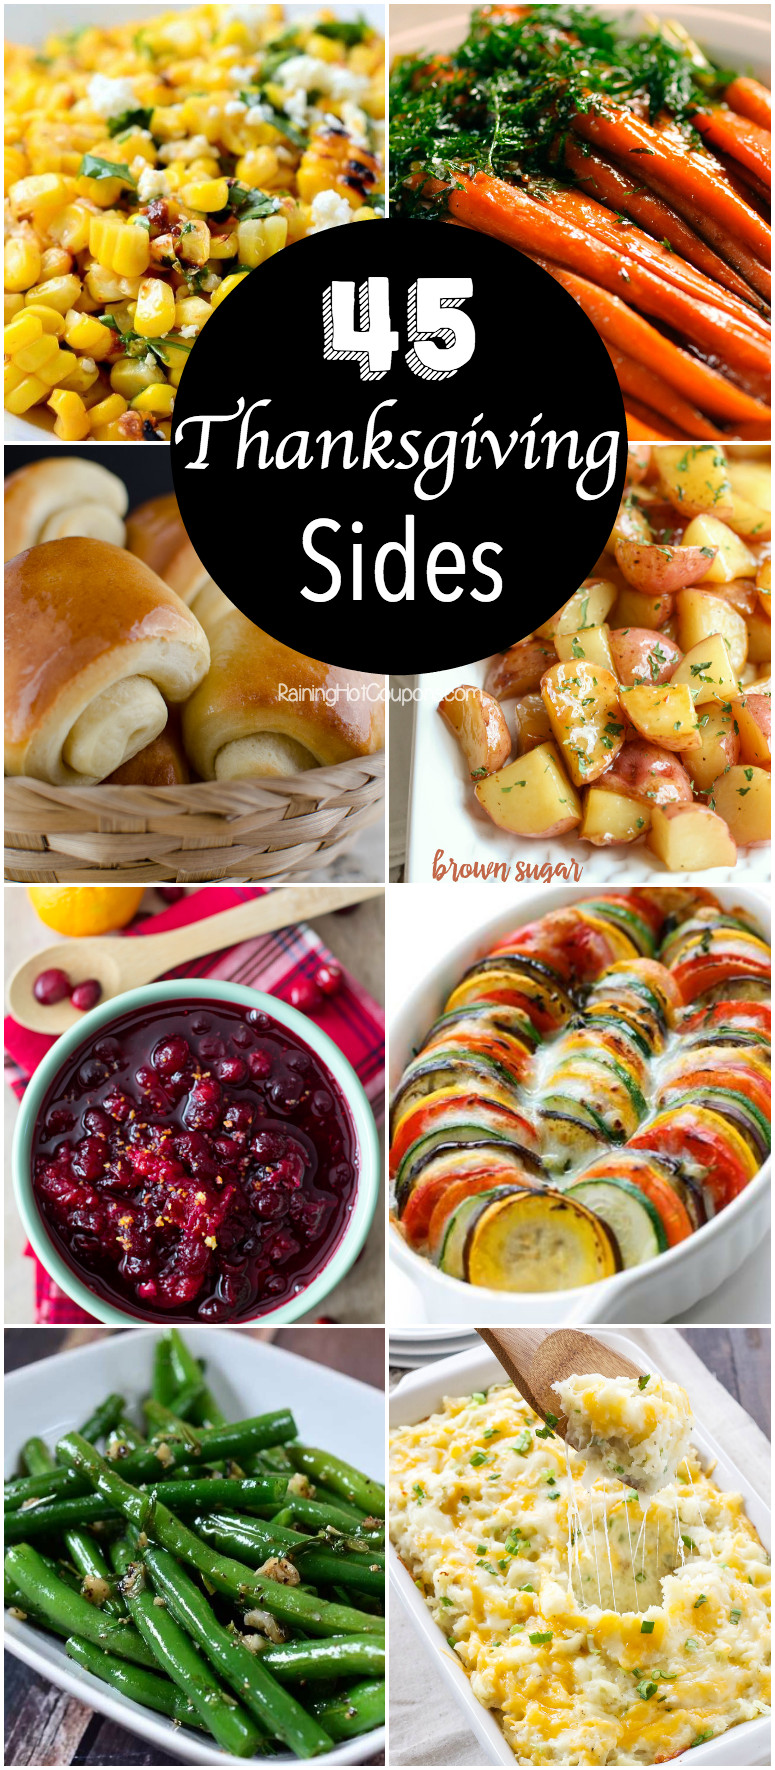 Thanksgiving Side Dishes Ideas
 45 Thanksgiving Side Dishes